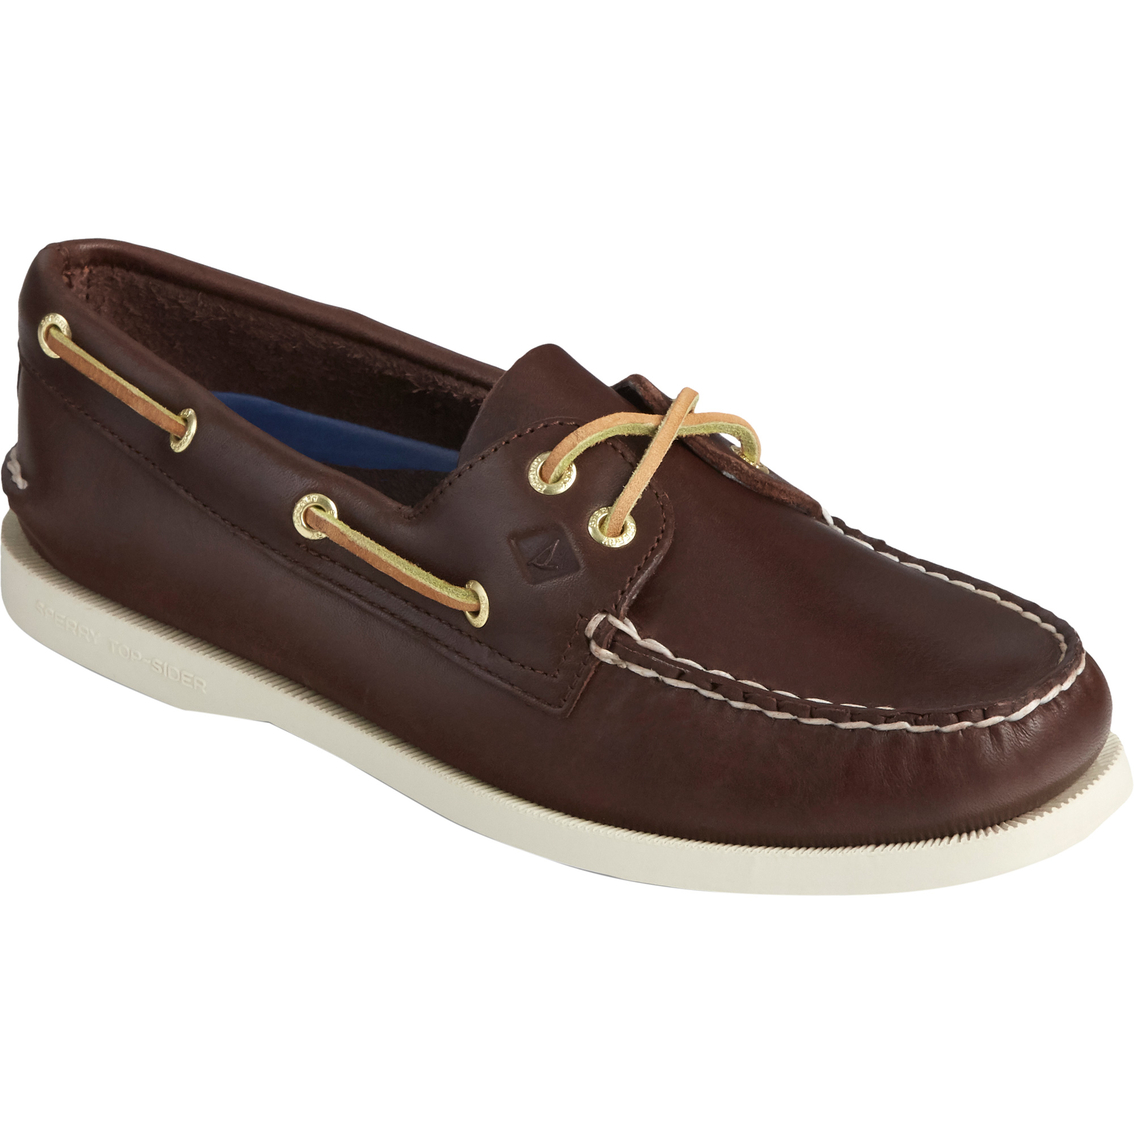 Sperry Women's Authentic Original 2 Eye Boat Shoes | Flats | Shoes ...